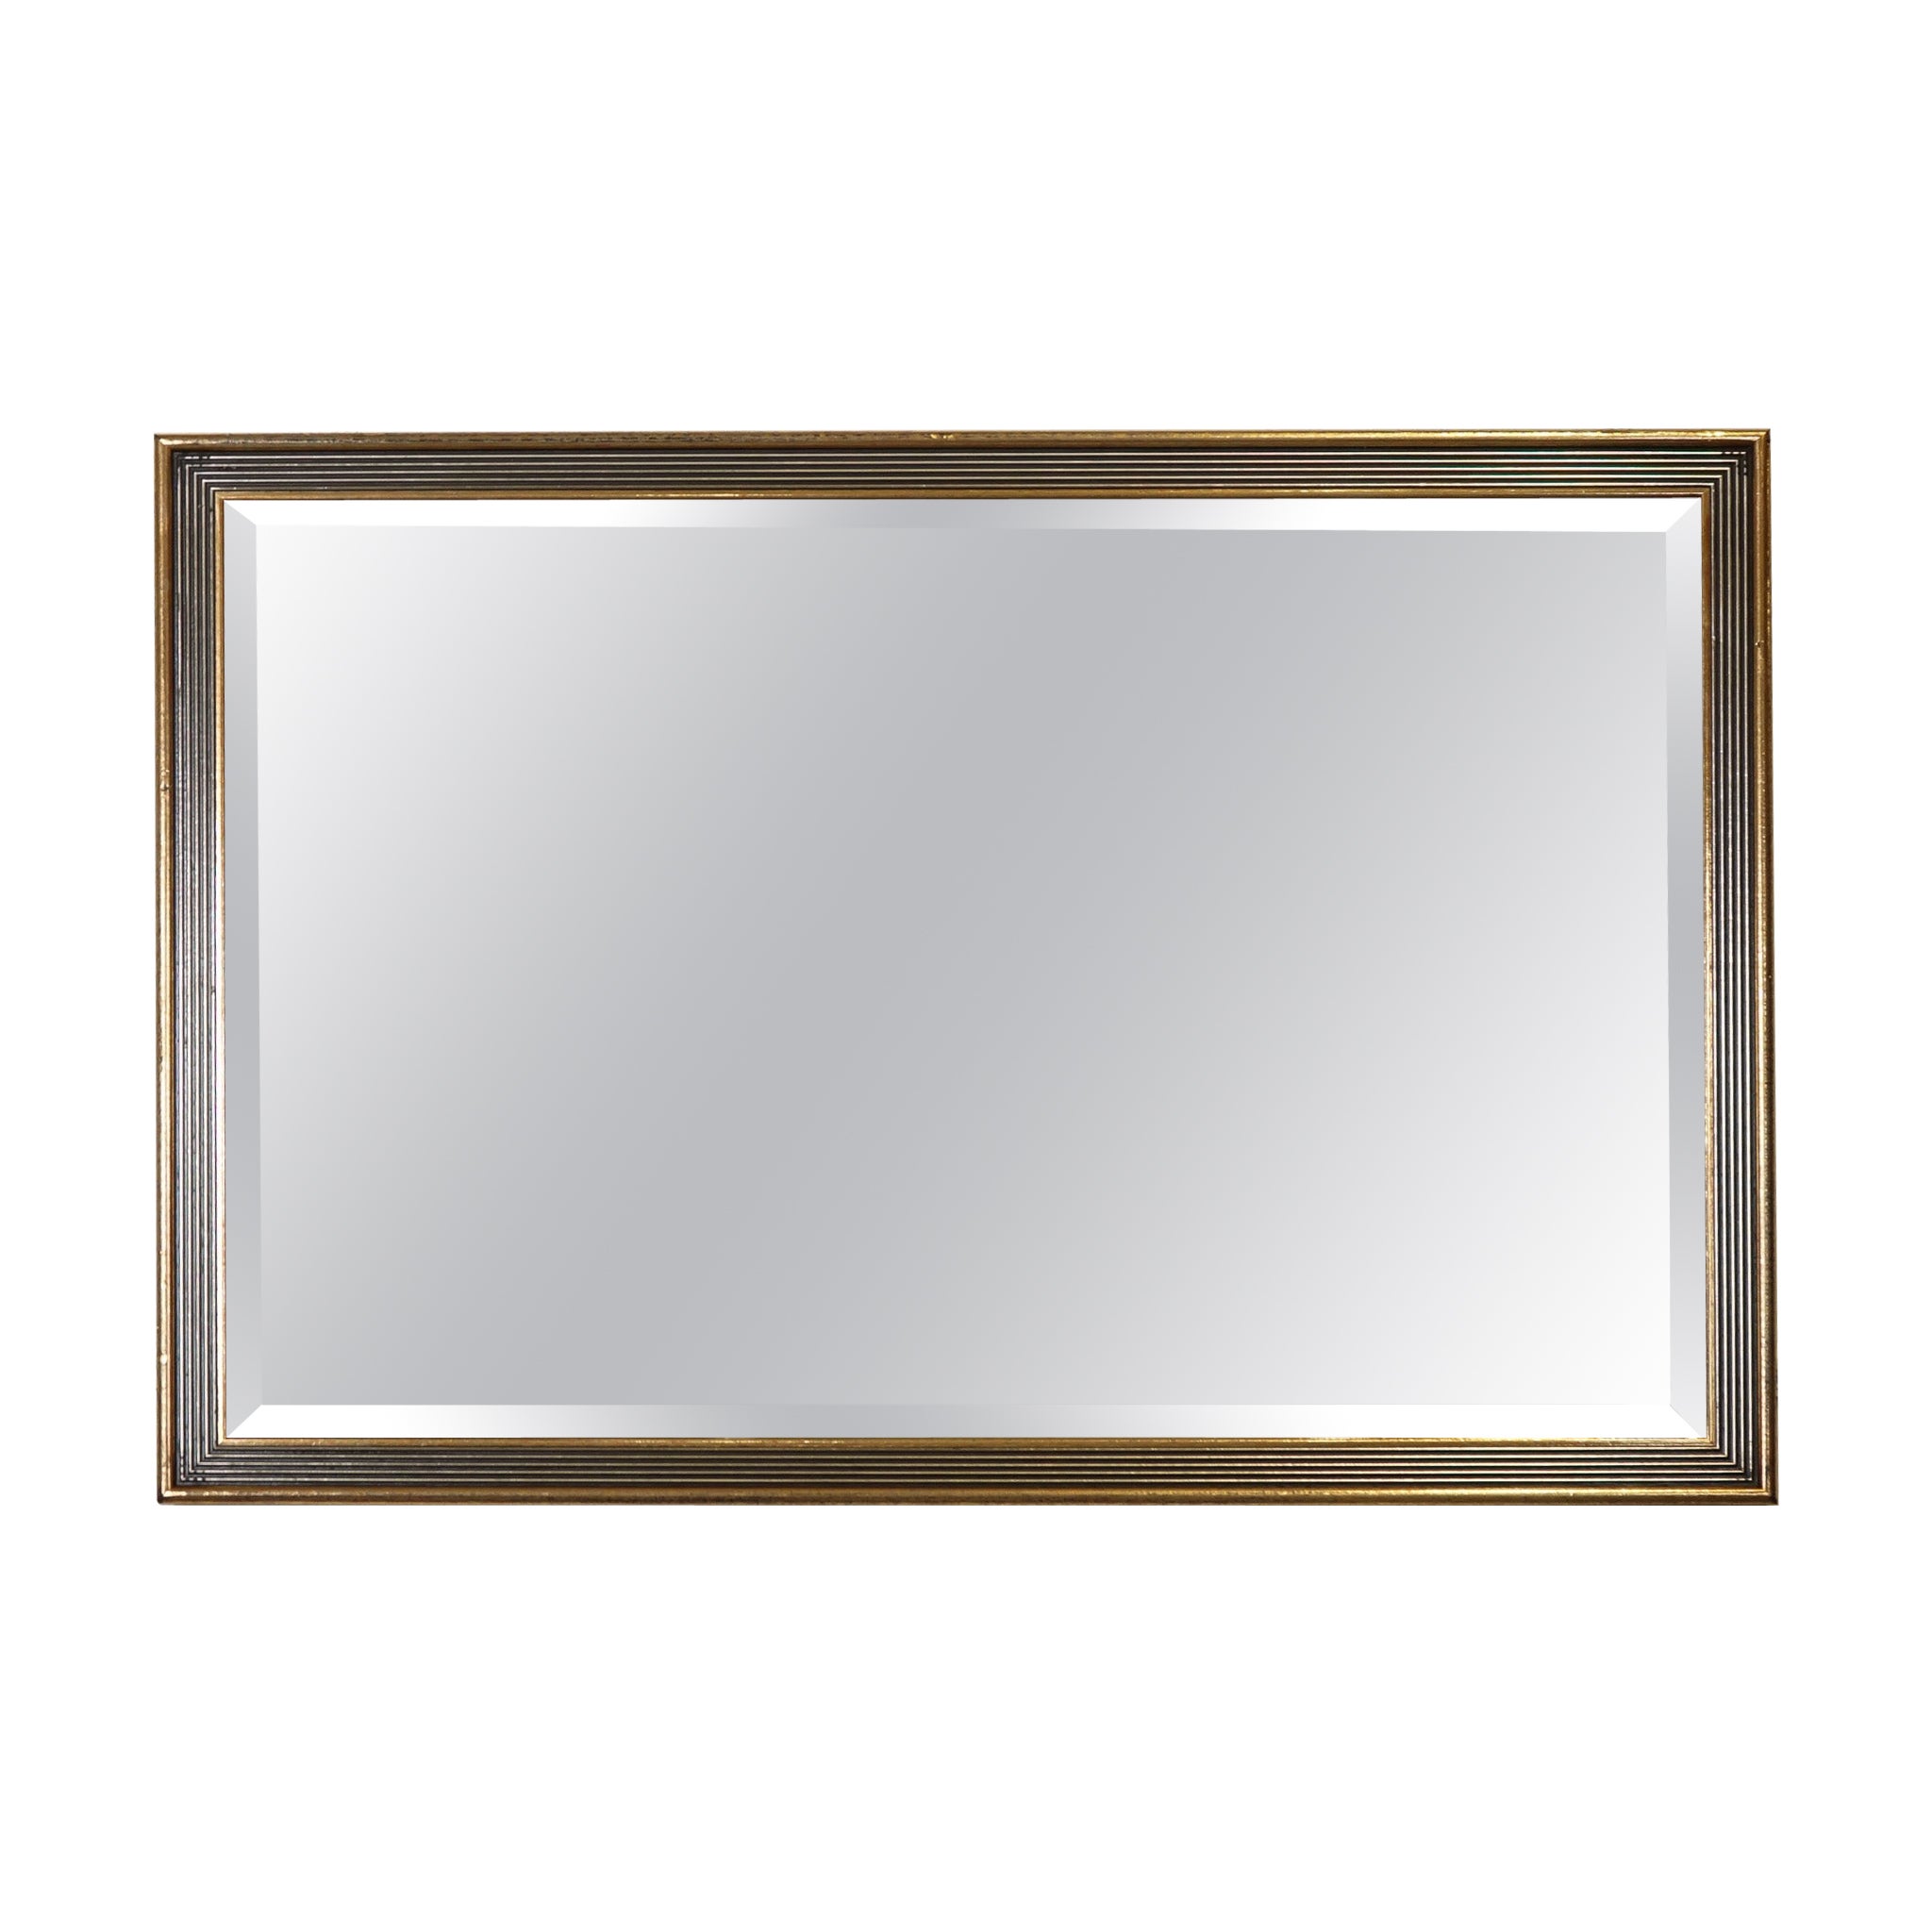 BEAUTIFUL GOLD & SILVER BEVELLED MIRROR j1 For Sale